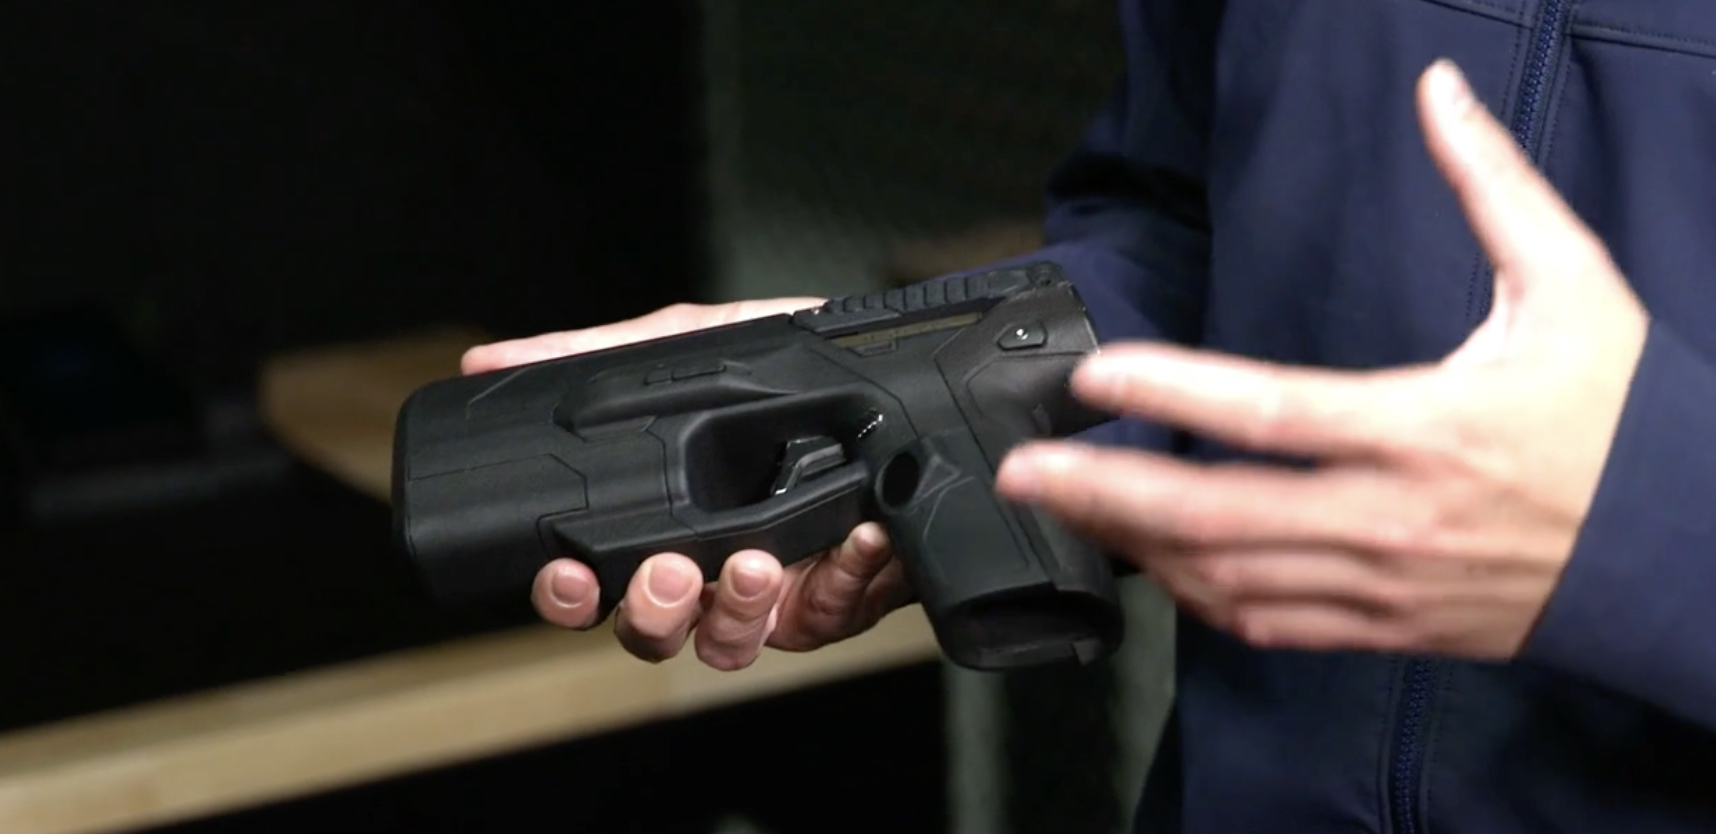 PHOTO: Colorado-based weapons startup BioFire Technologies has introduced a "smart gun" that uses smartphone-like technology to keep it from being fired by unauthorized users.